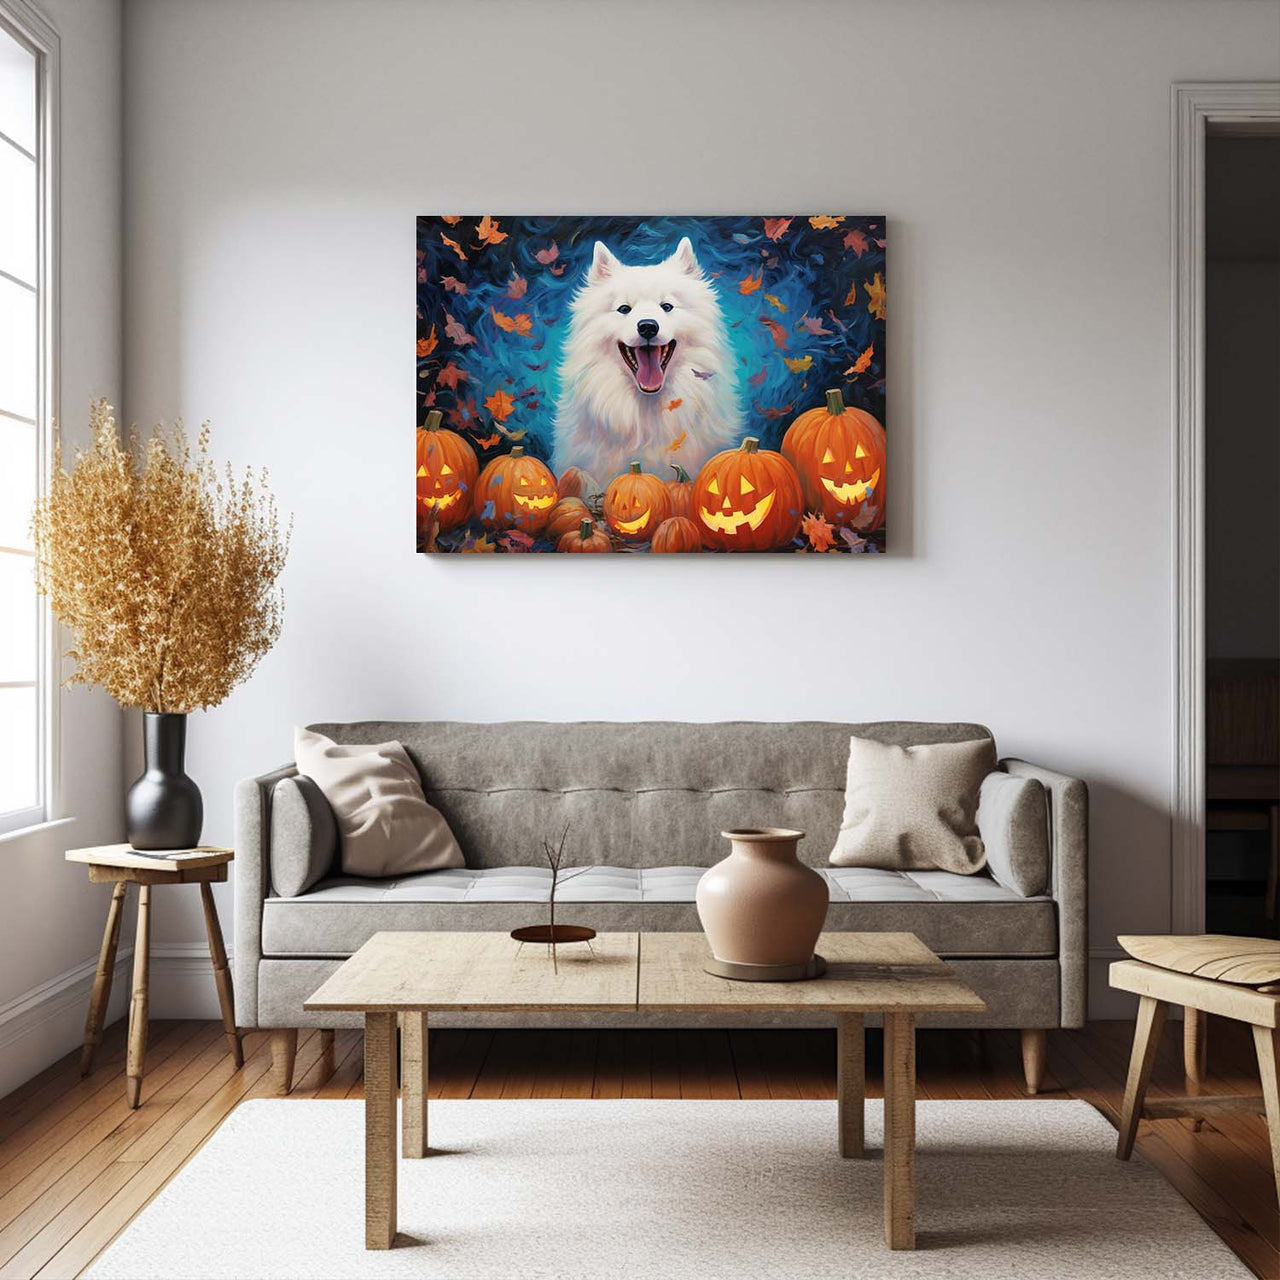 Samoyeds Dog 02 Halloween With Pumpkin Oil Painting Van Goh Style, Wooden Canvas Prints Wall Art Painting , Canvas 3d Art